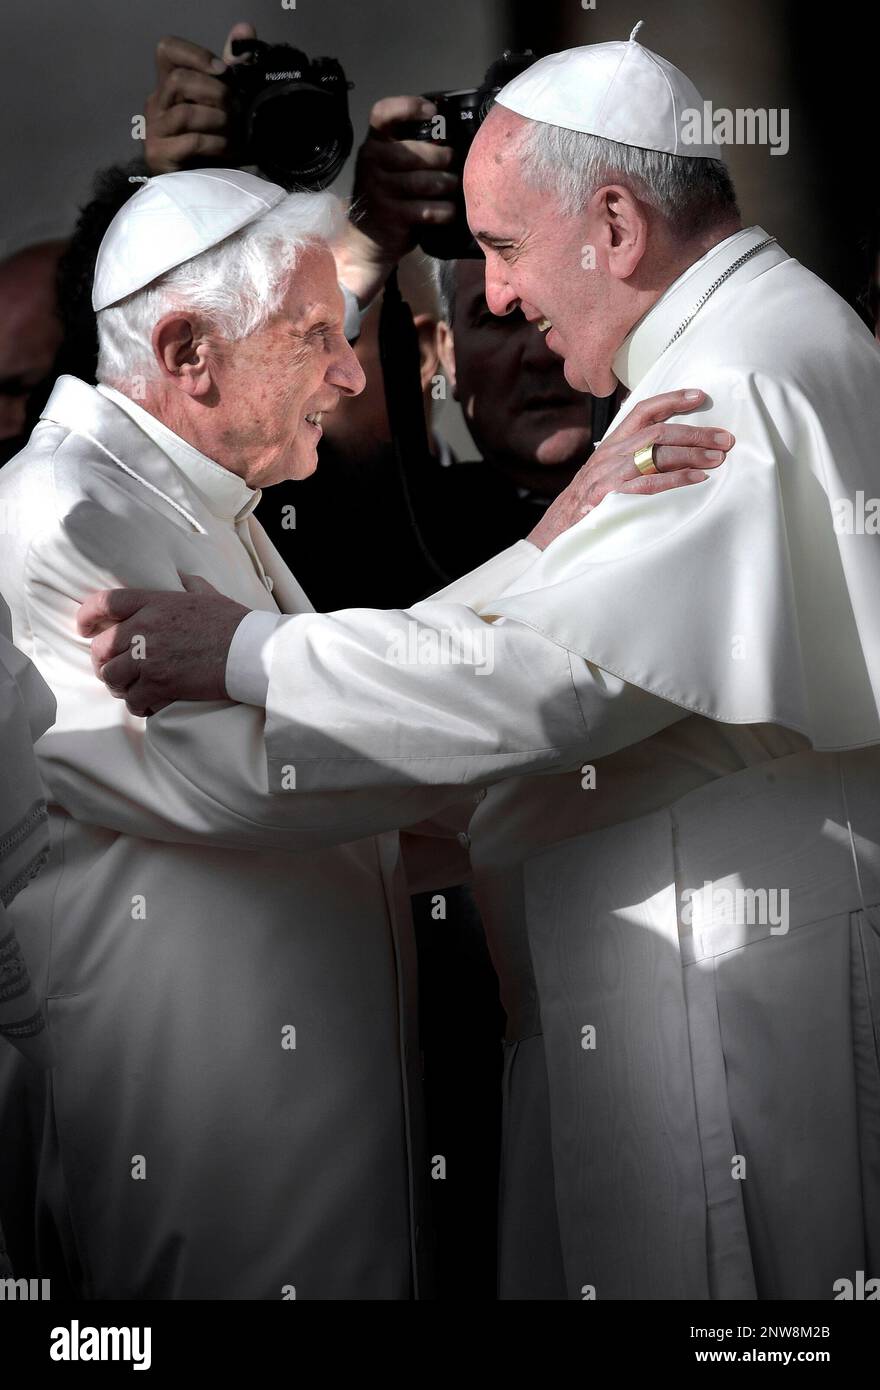 March 13, 2023 marks 10 years of Pontificate for Pope Francis. in the picture : Pope emeritus Benedict XVI with Pope Francis during a papal mass for elderly people at St Peter's square at the Vatican.on September 28, 2014 Stock Photo